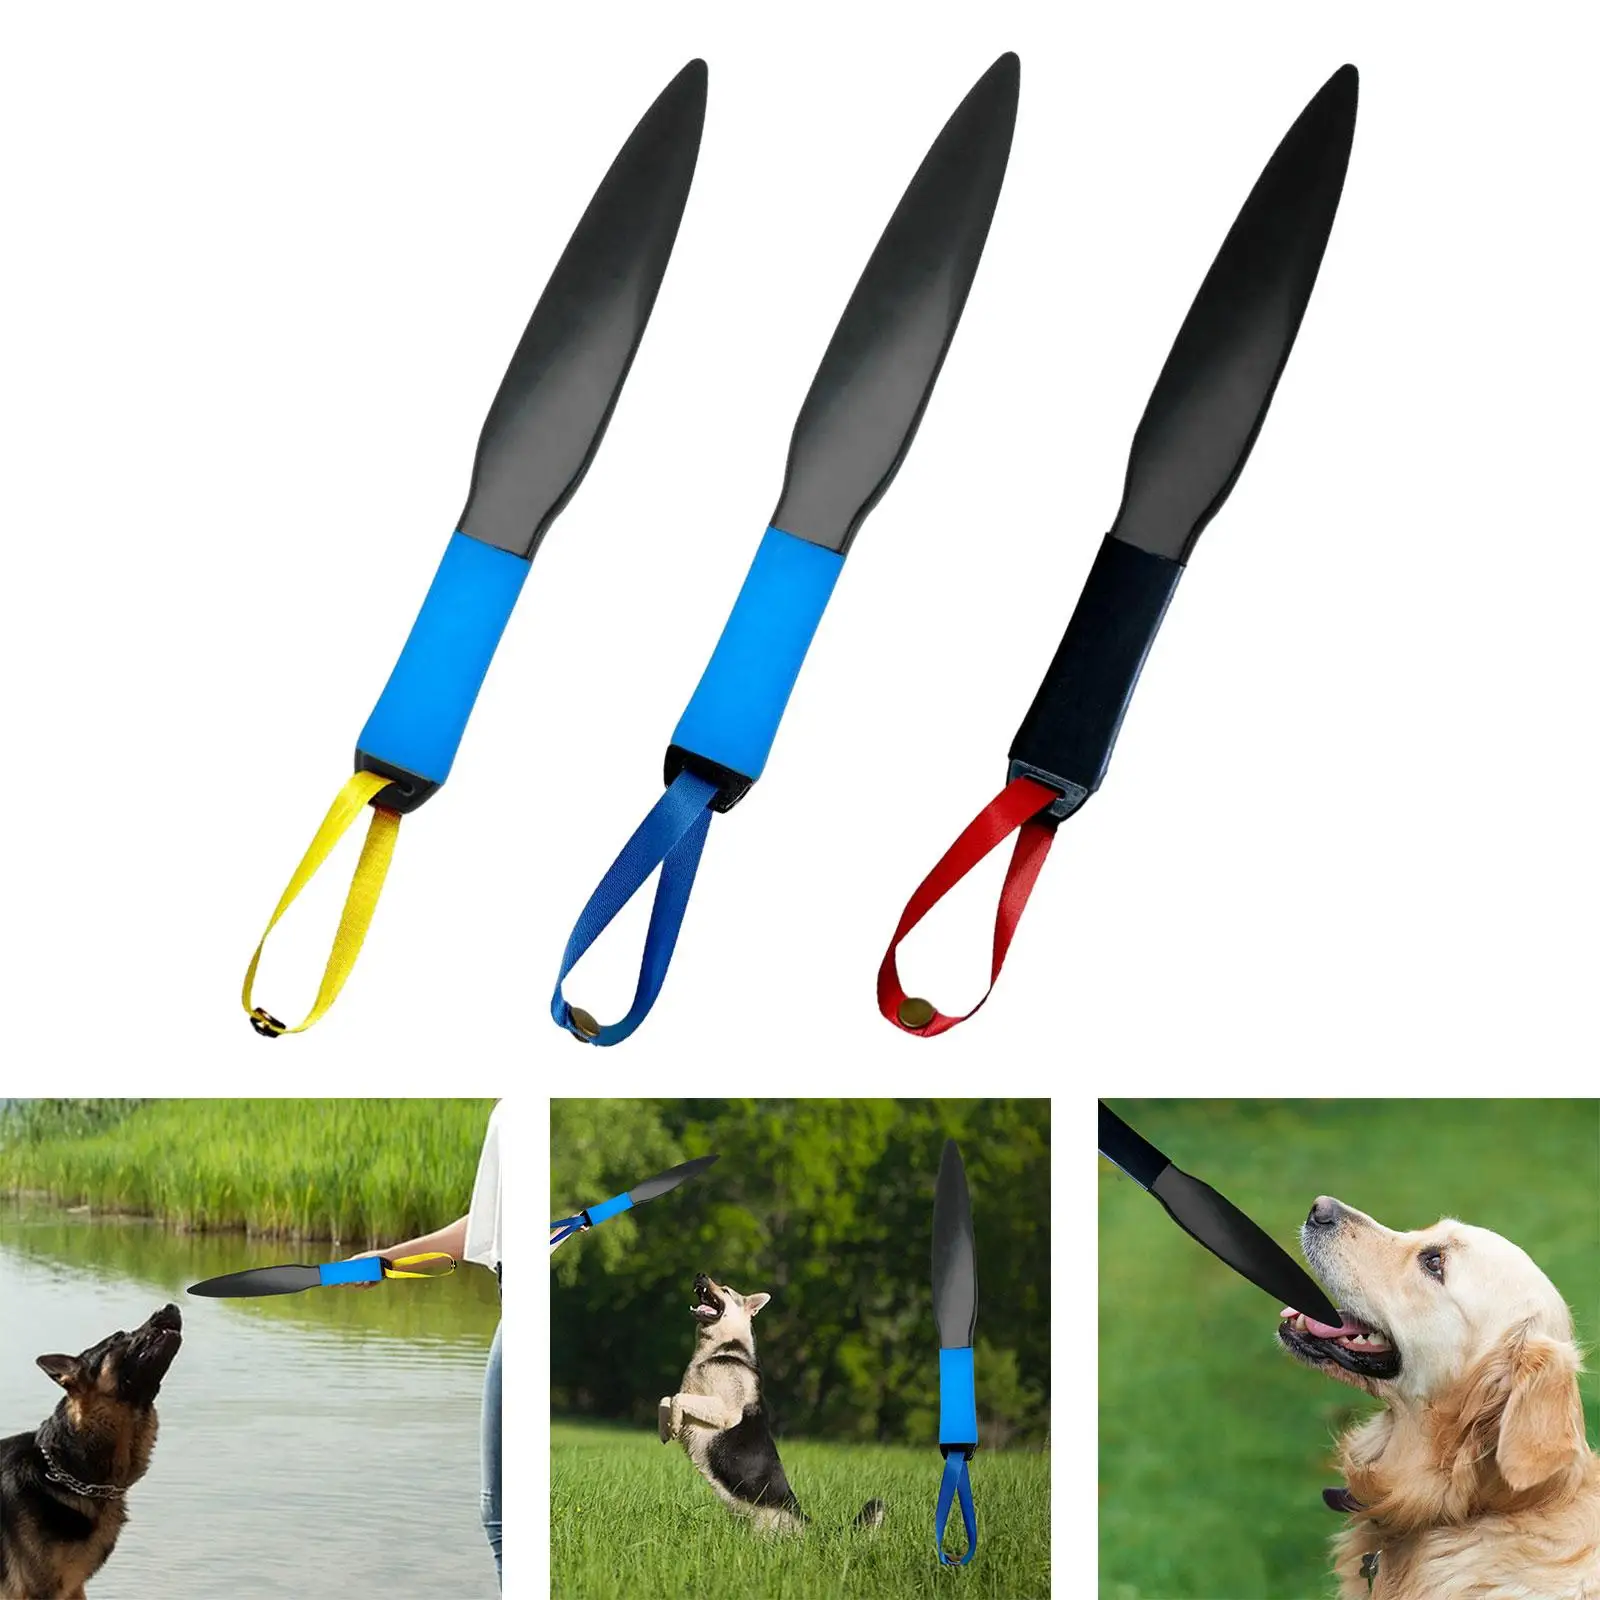 Dog Break Stick Chew Toys Protect Interactive Dog Bite Training Stick for Training Medium Large Strong Dogs Pitbull Pet Supplies